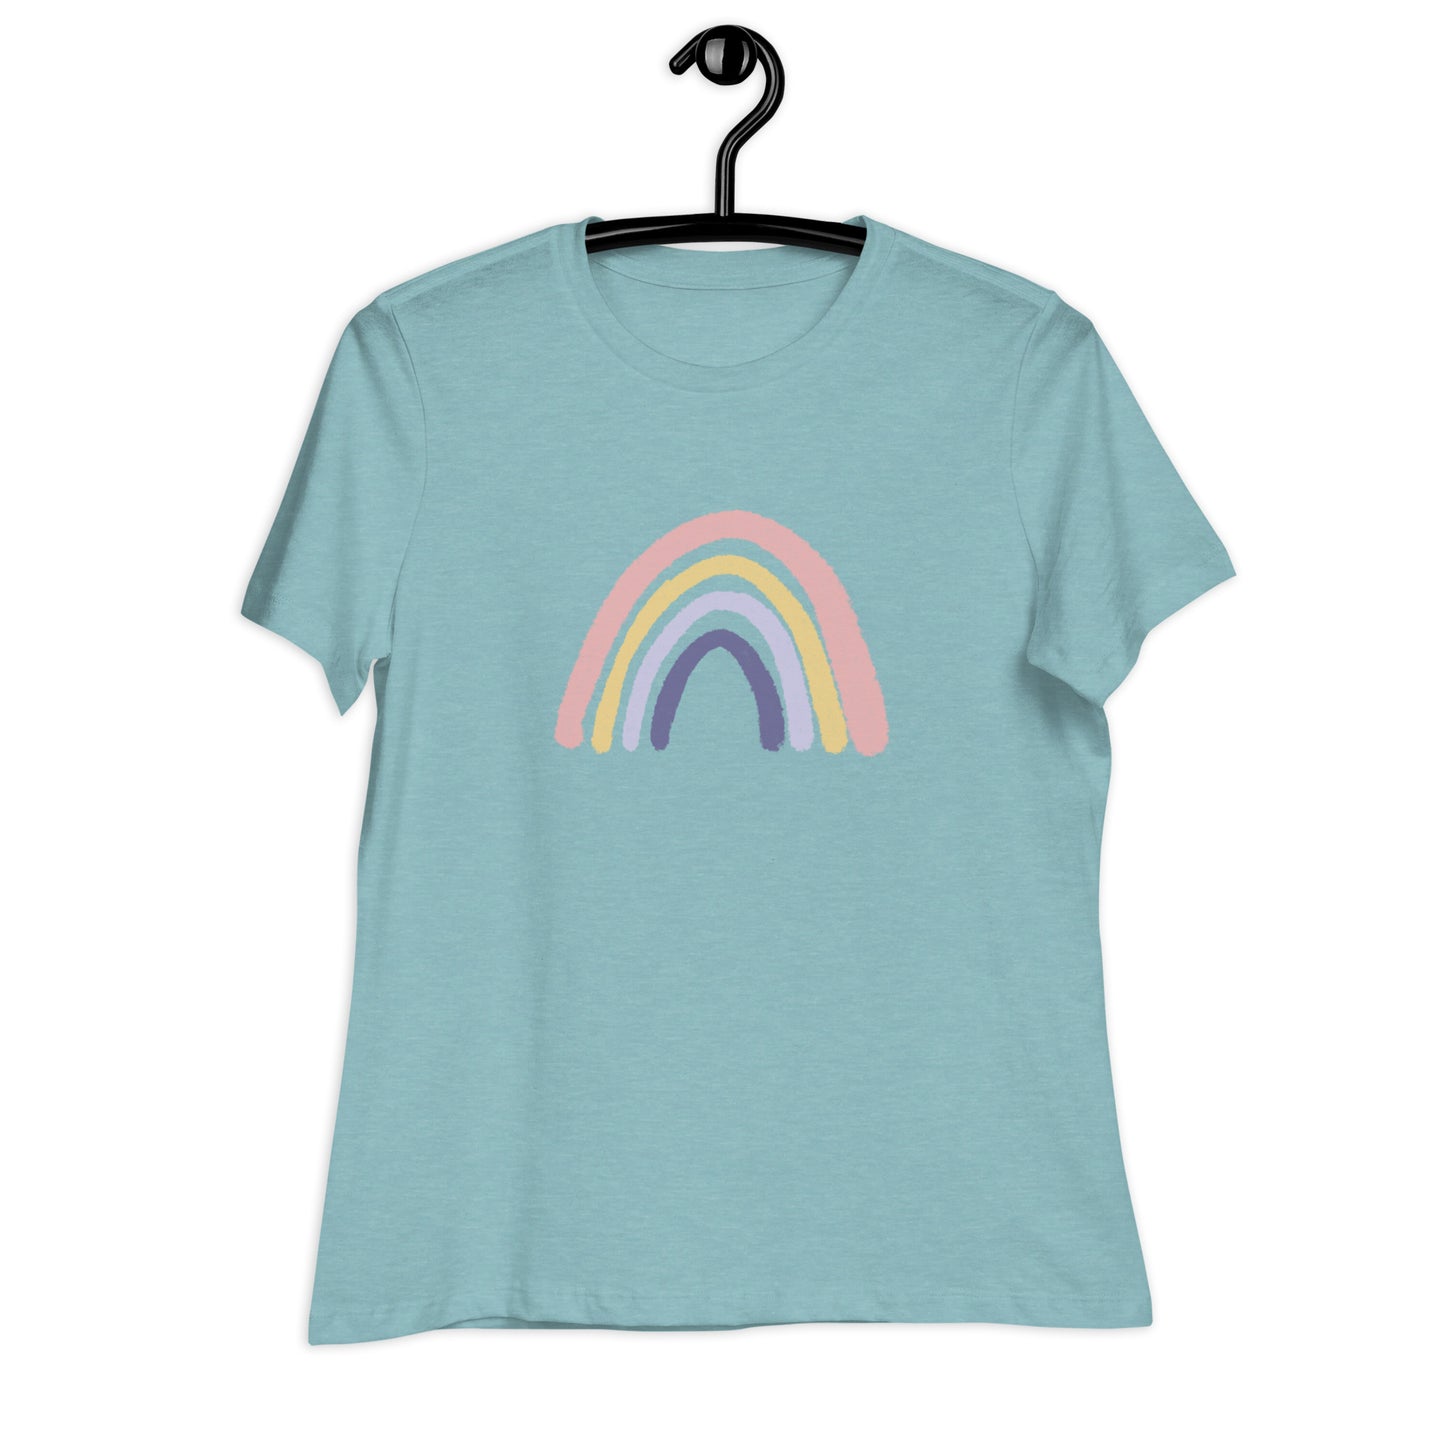 Watercolor Rainbow Women's Relaxed T-Shirt